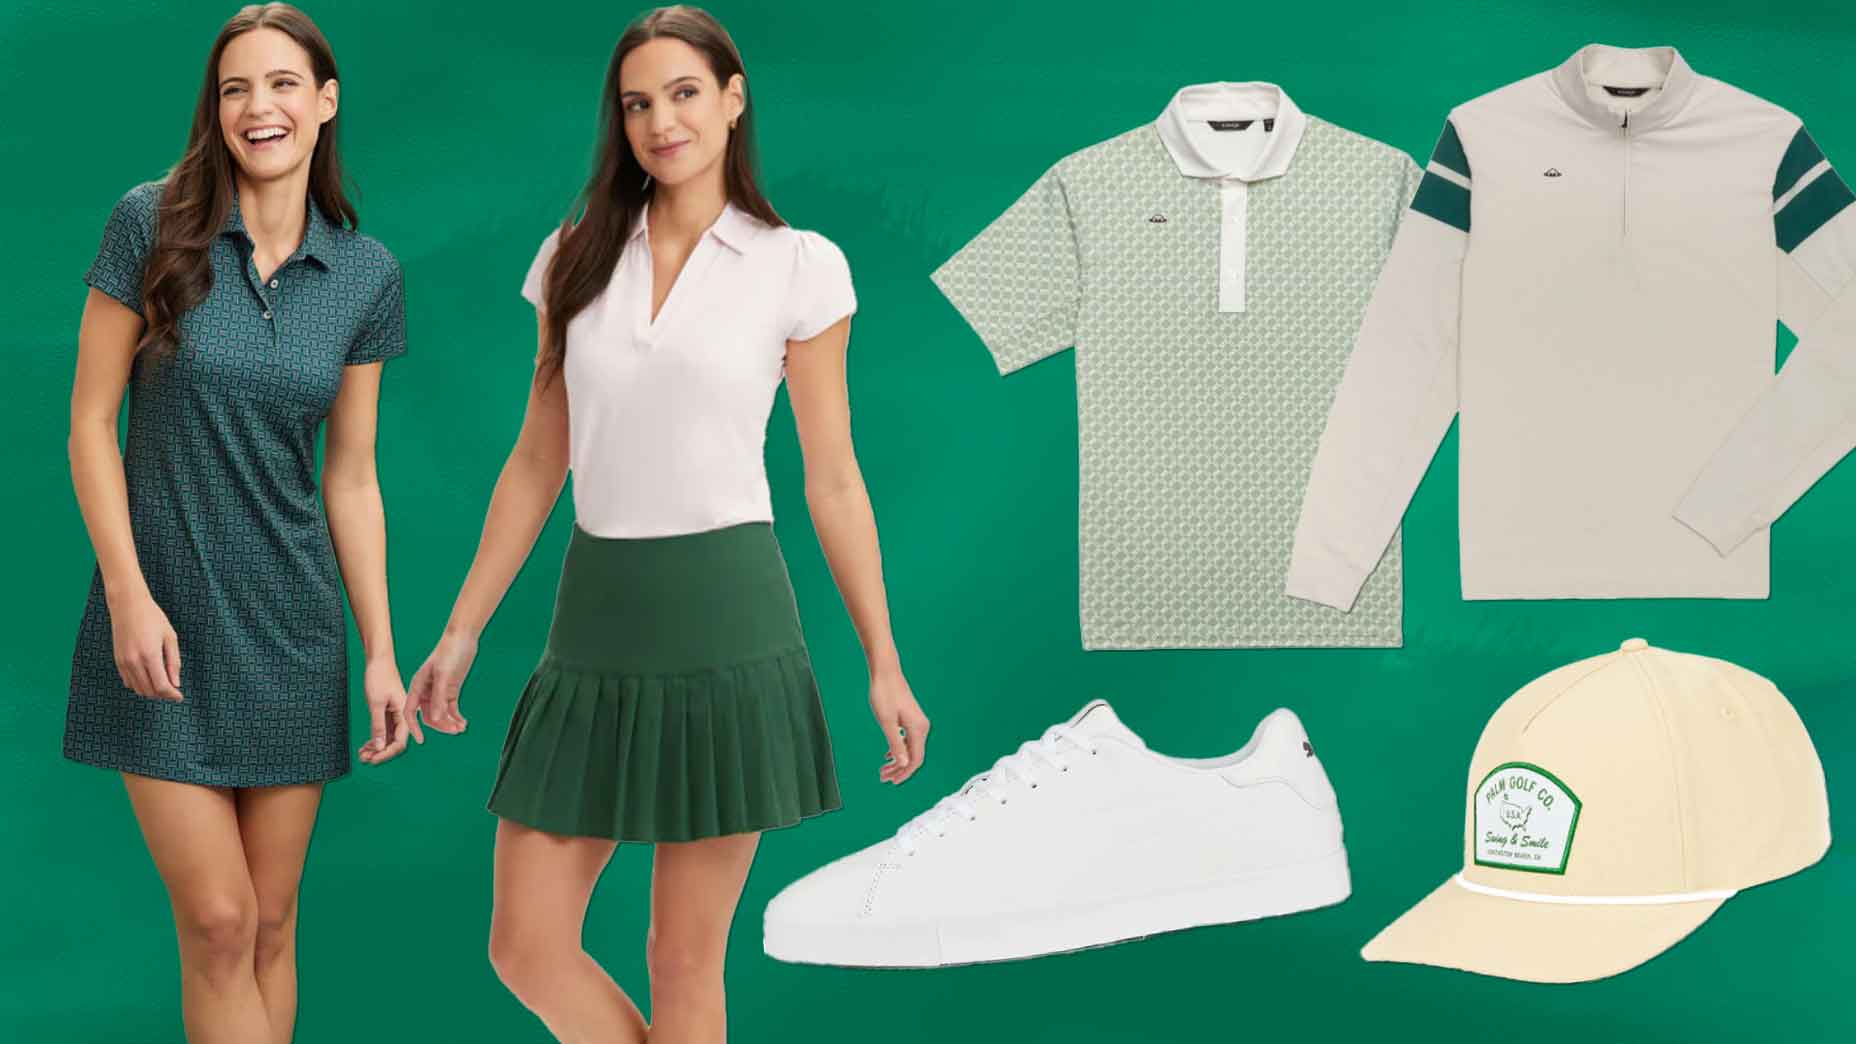 How to dress for the Masters: 25 stylish ideas we love